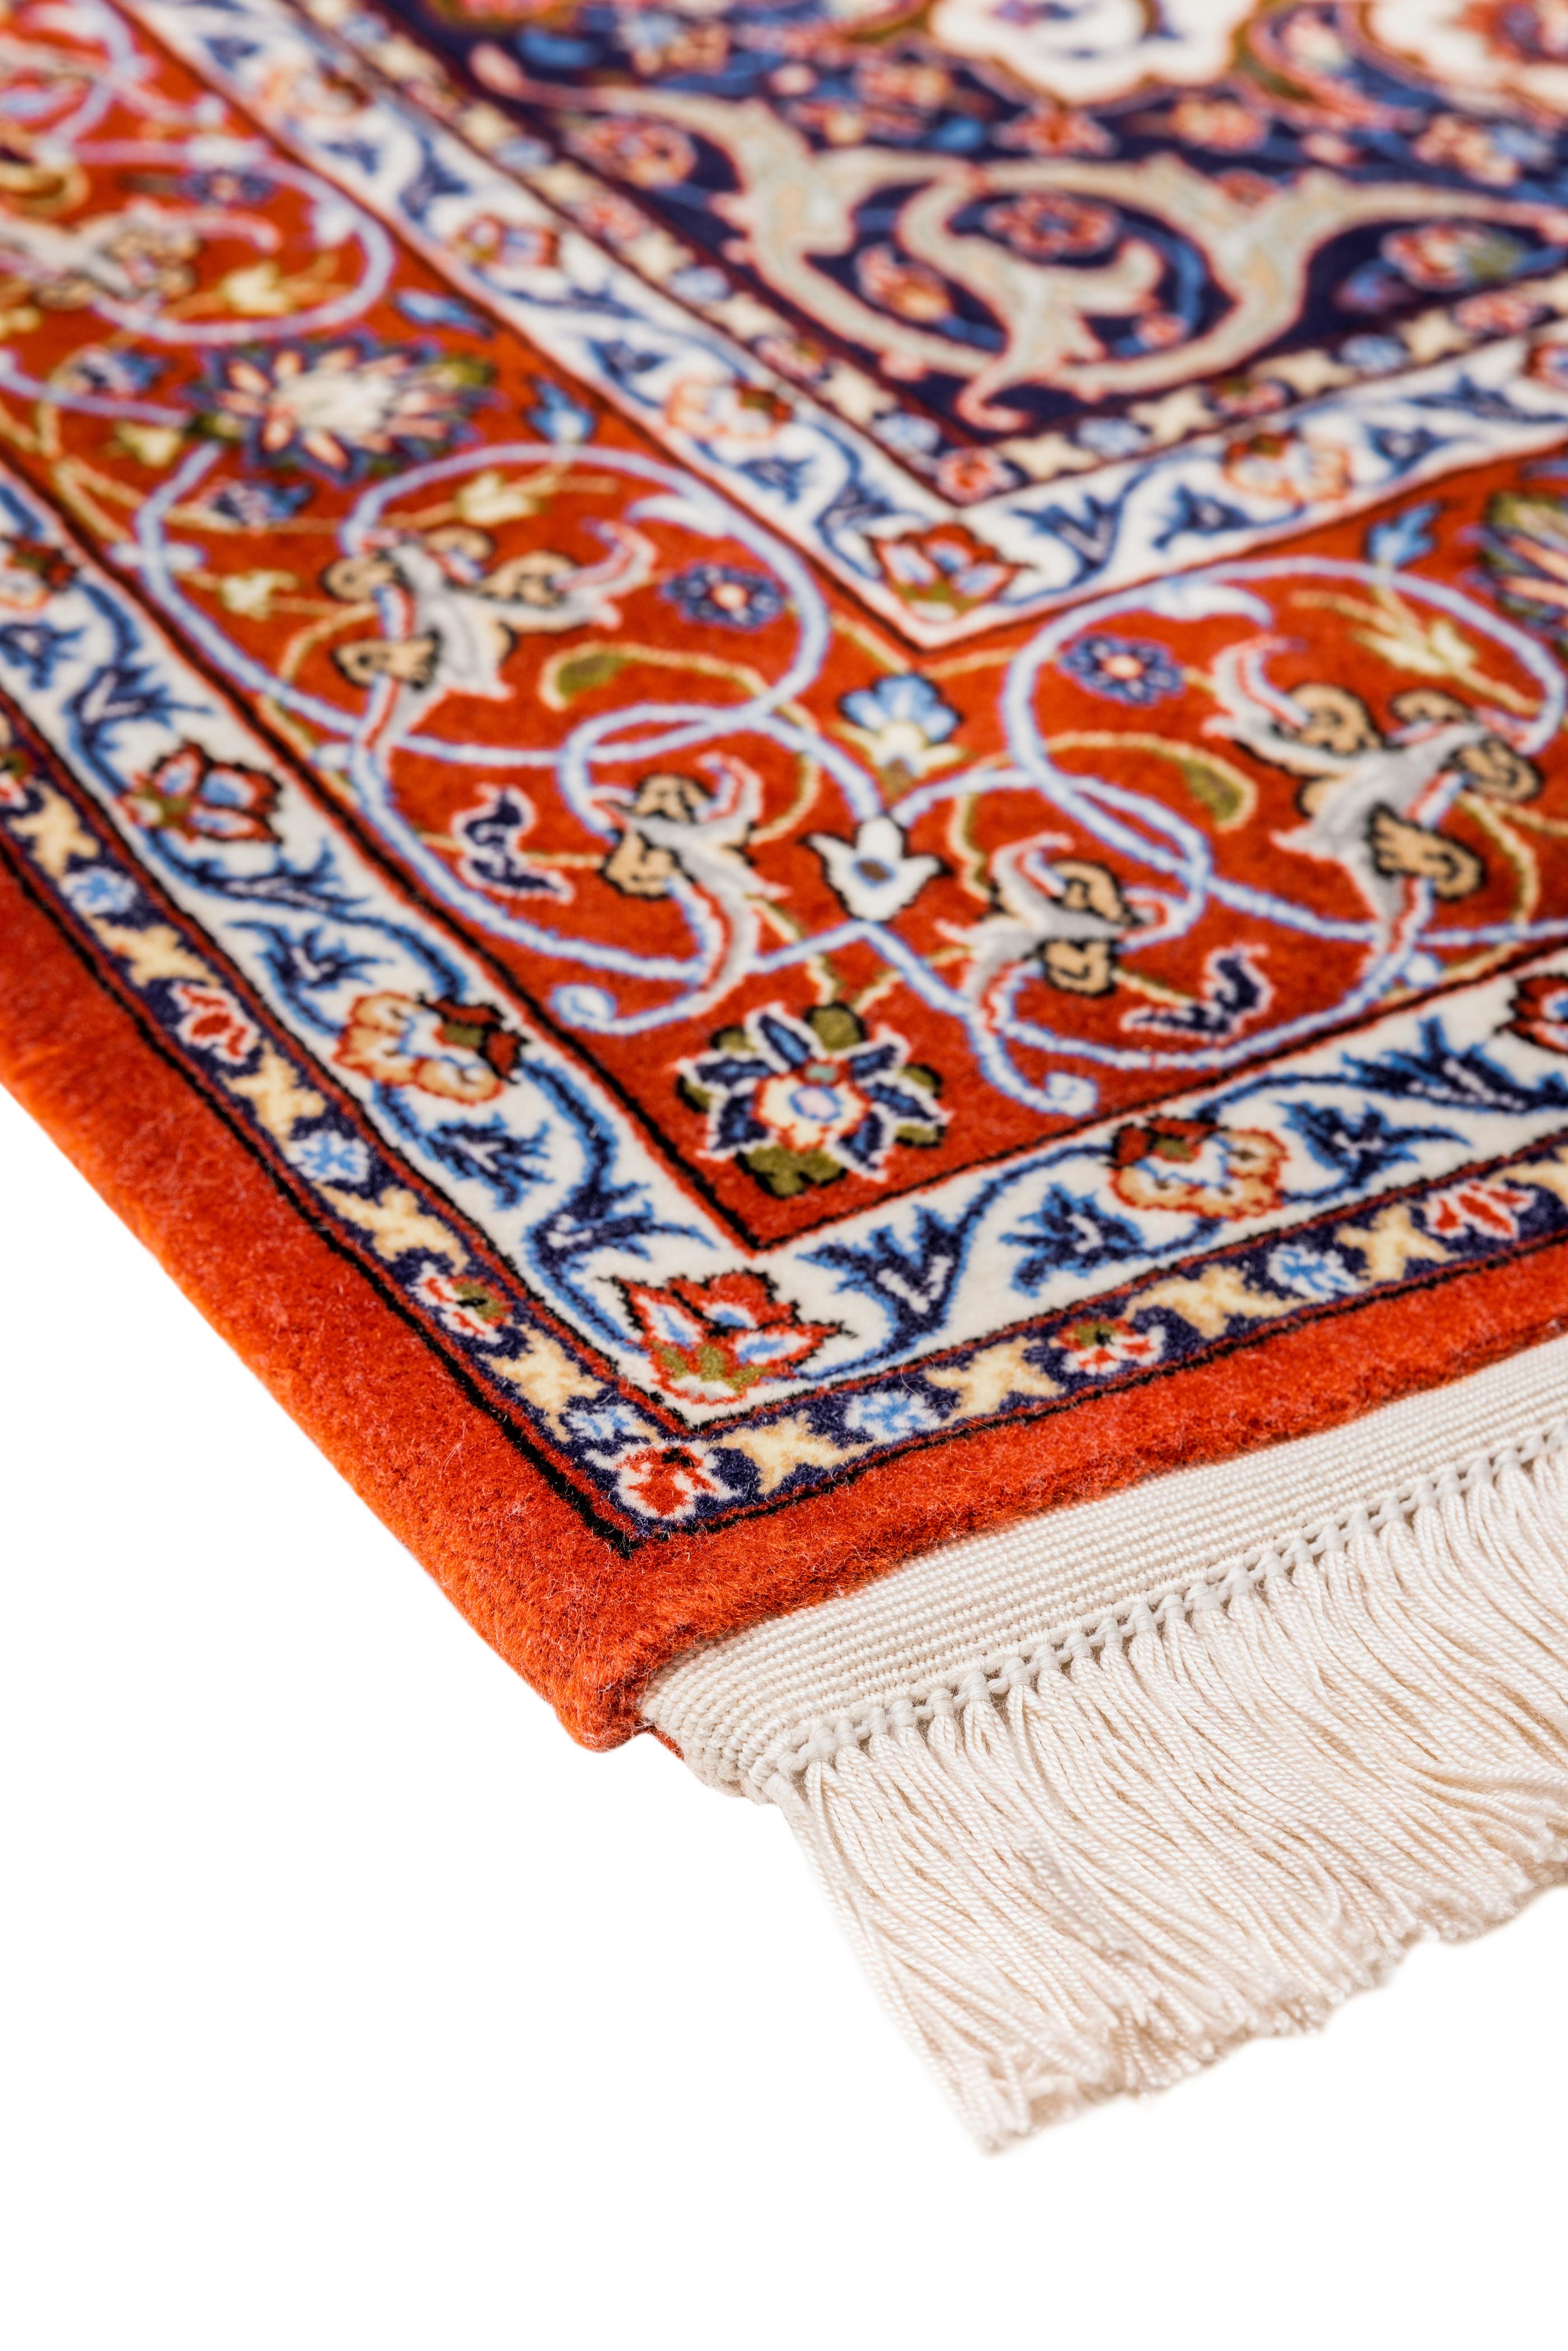 Renowned for their rich colors and interesting designs, Persian rugs are made with all natural wools and silk. Their beauty and the impact it will have on a home is endless.

Exact Dimensions: 5' 5